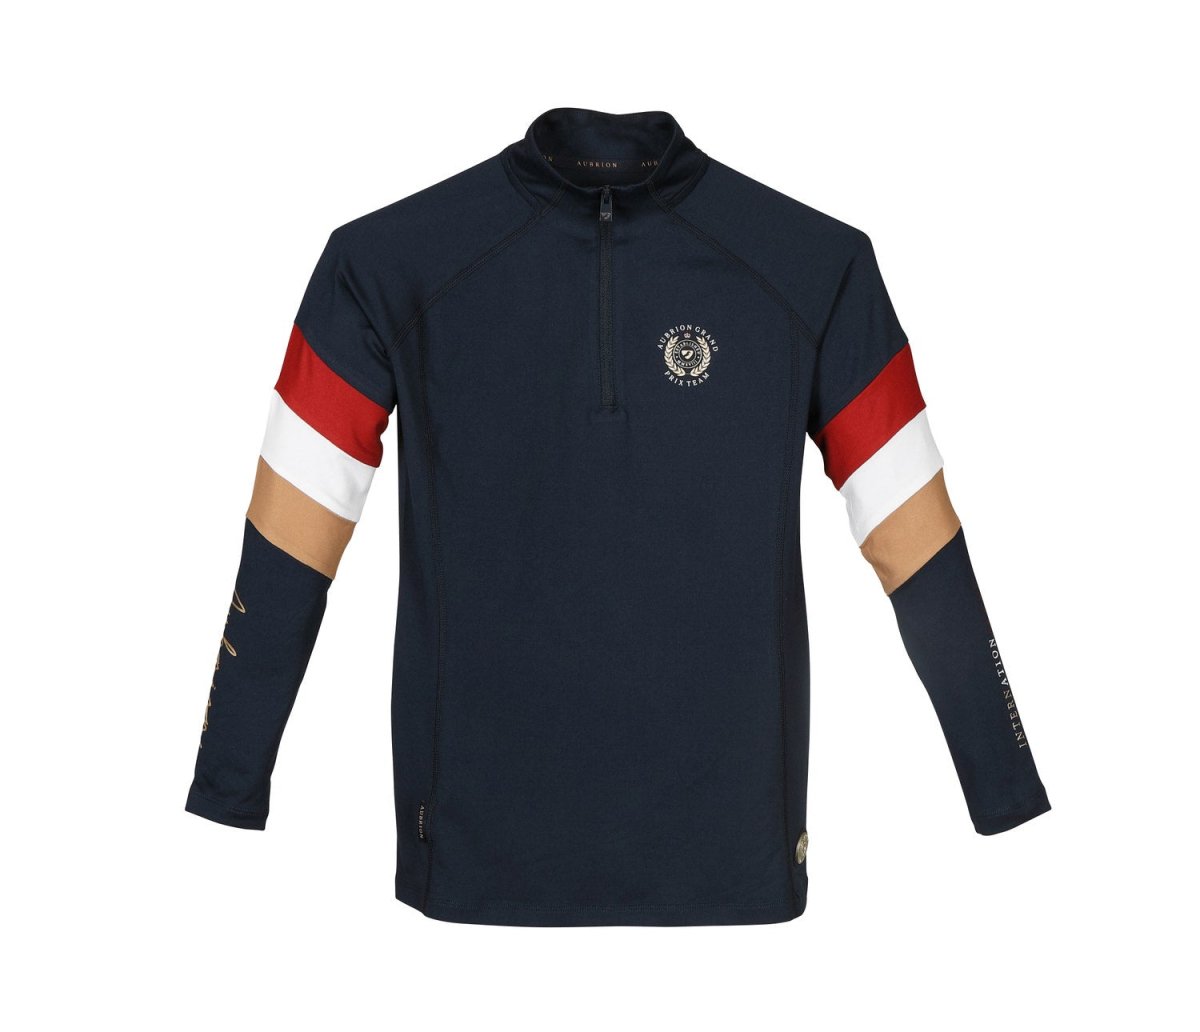 Aubrion AW23 Young Rider Team Baselayer - Navy - 7/8